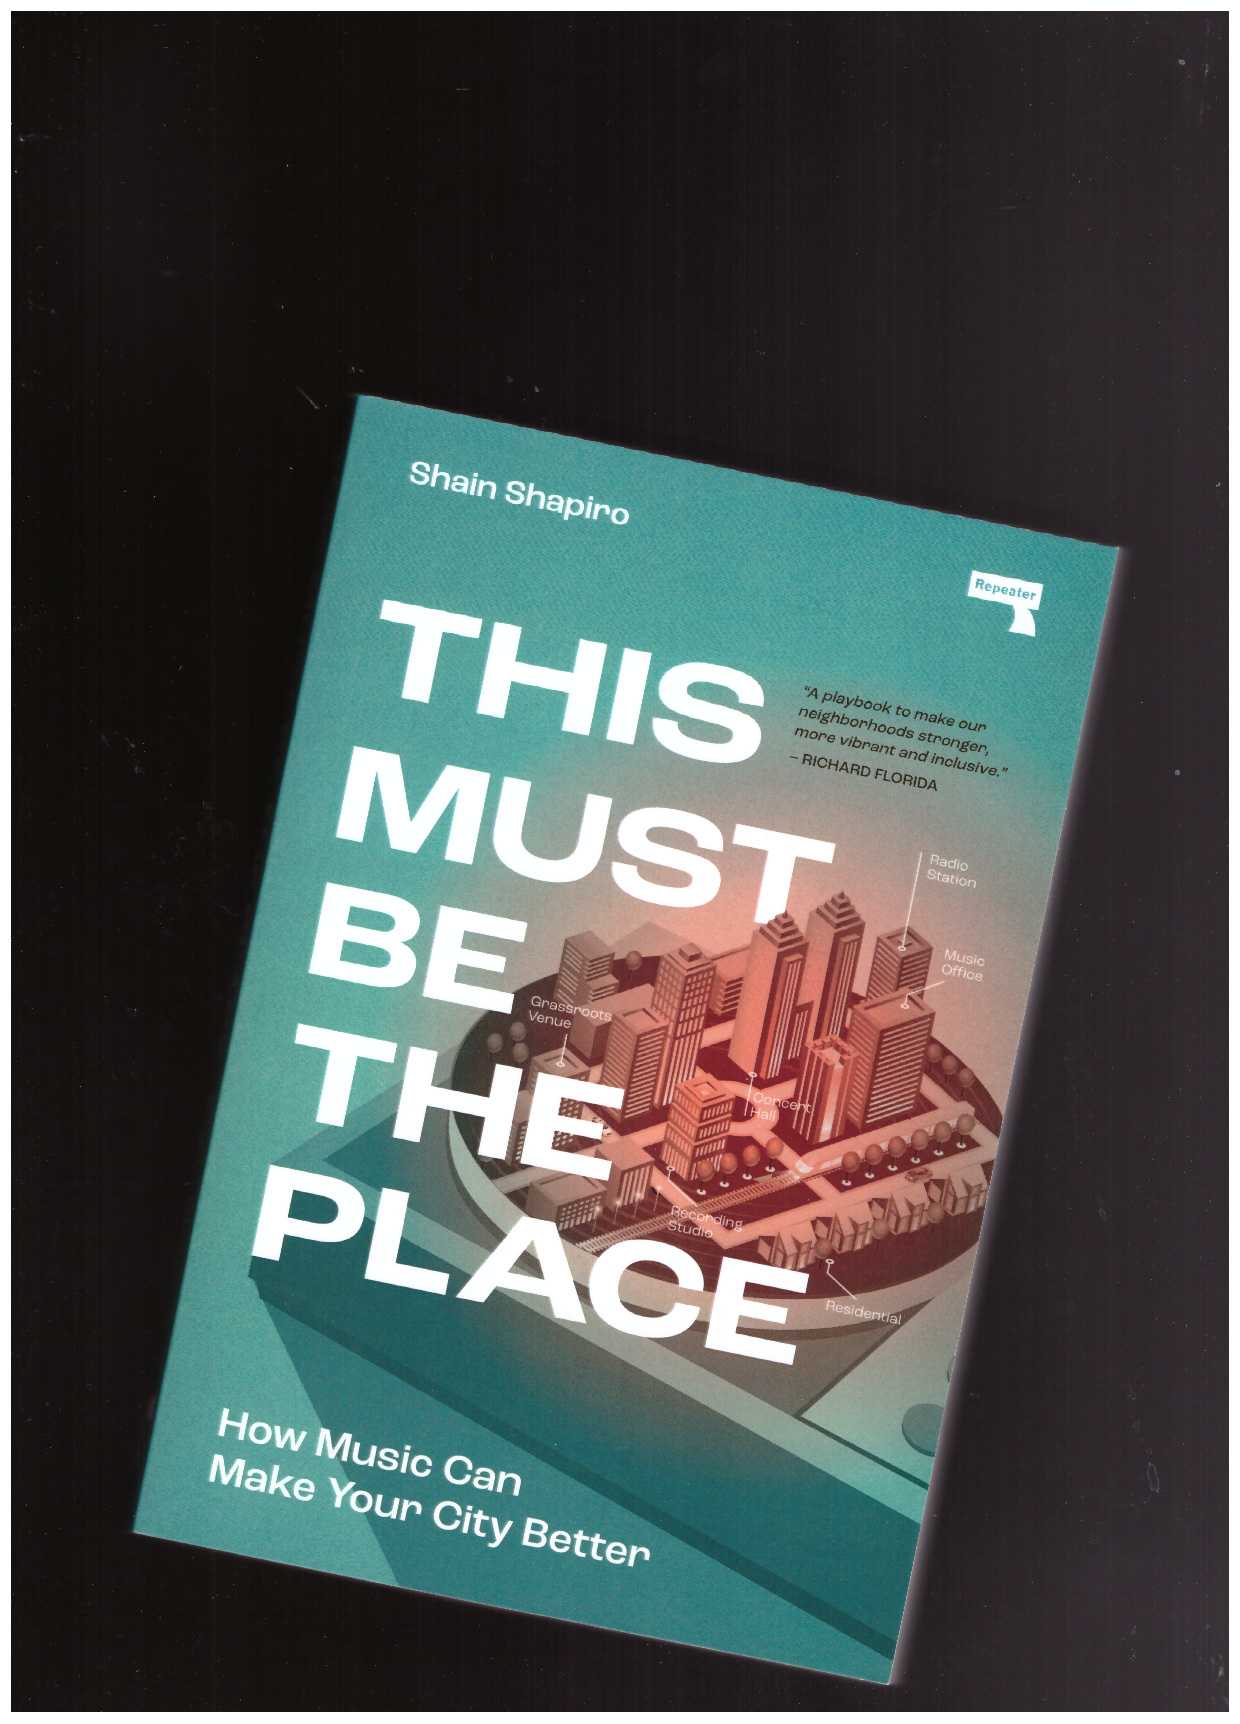  SHAPIRO, Shain - This Must Be the Place: How Music Can Make Your City Better